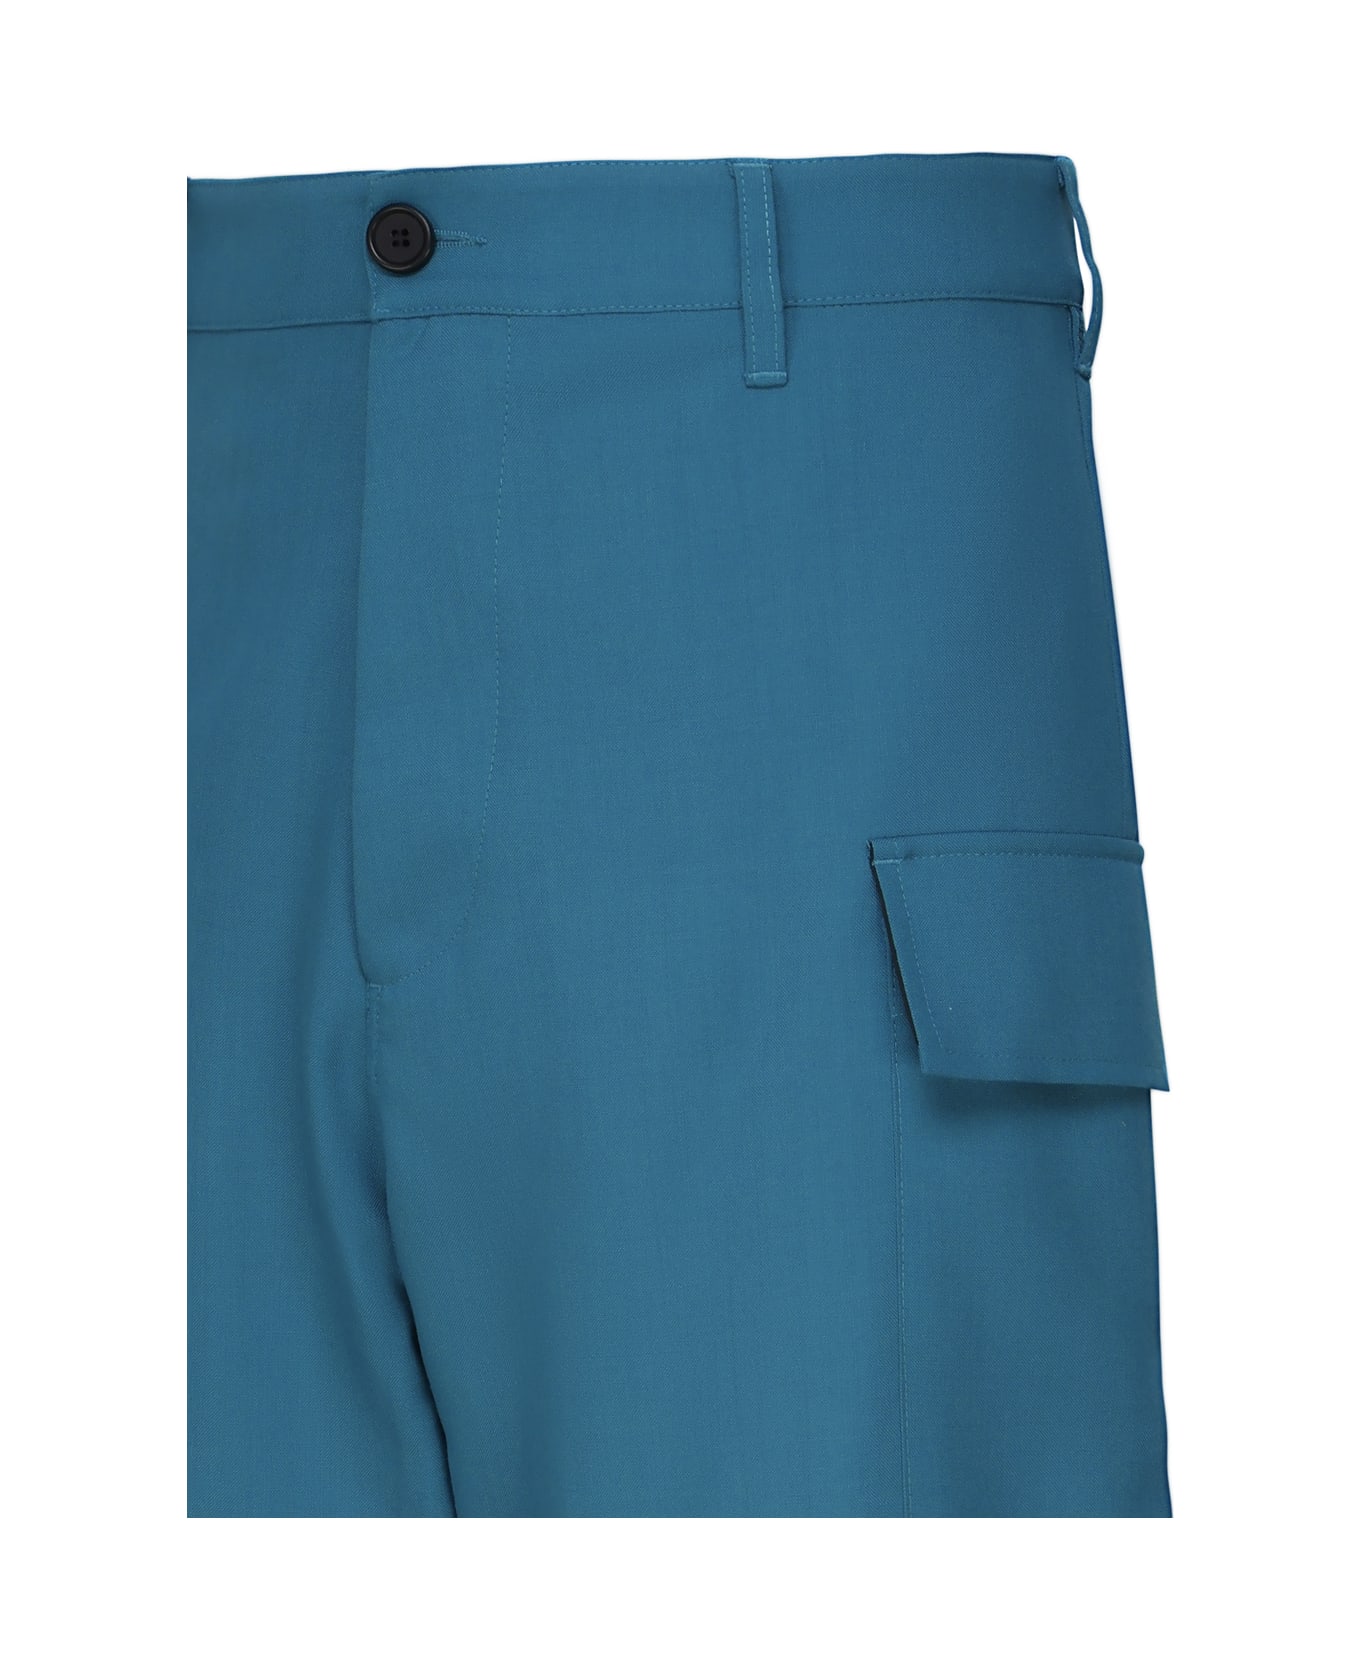 Marni Cool Wool Trousers With Cargo Pockets - Petrol blue